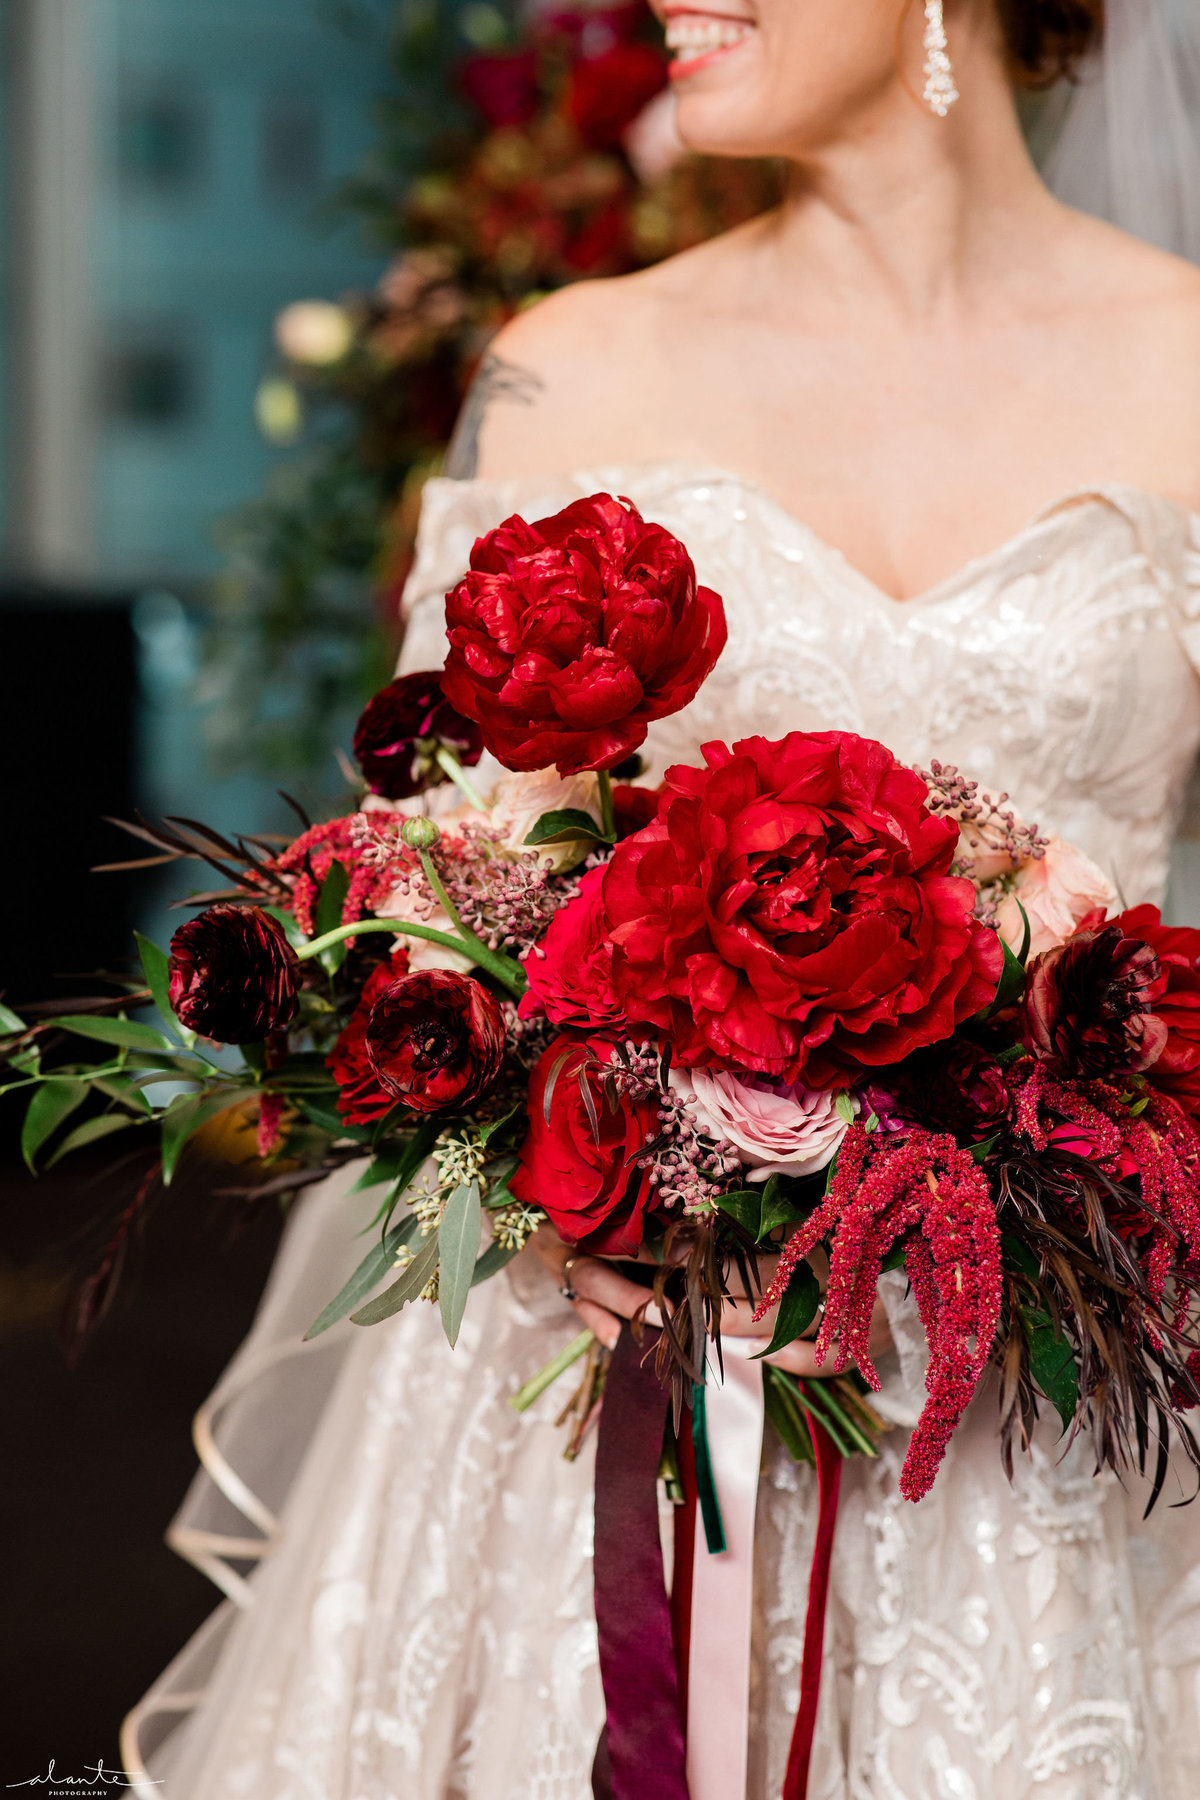 Bride holding bouquet of red peonies, red amaranthus, roses, and ranunculus, with ribbon streamers